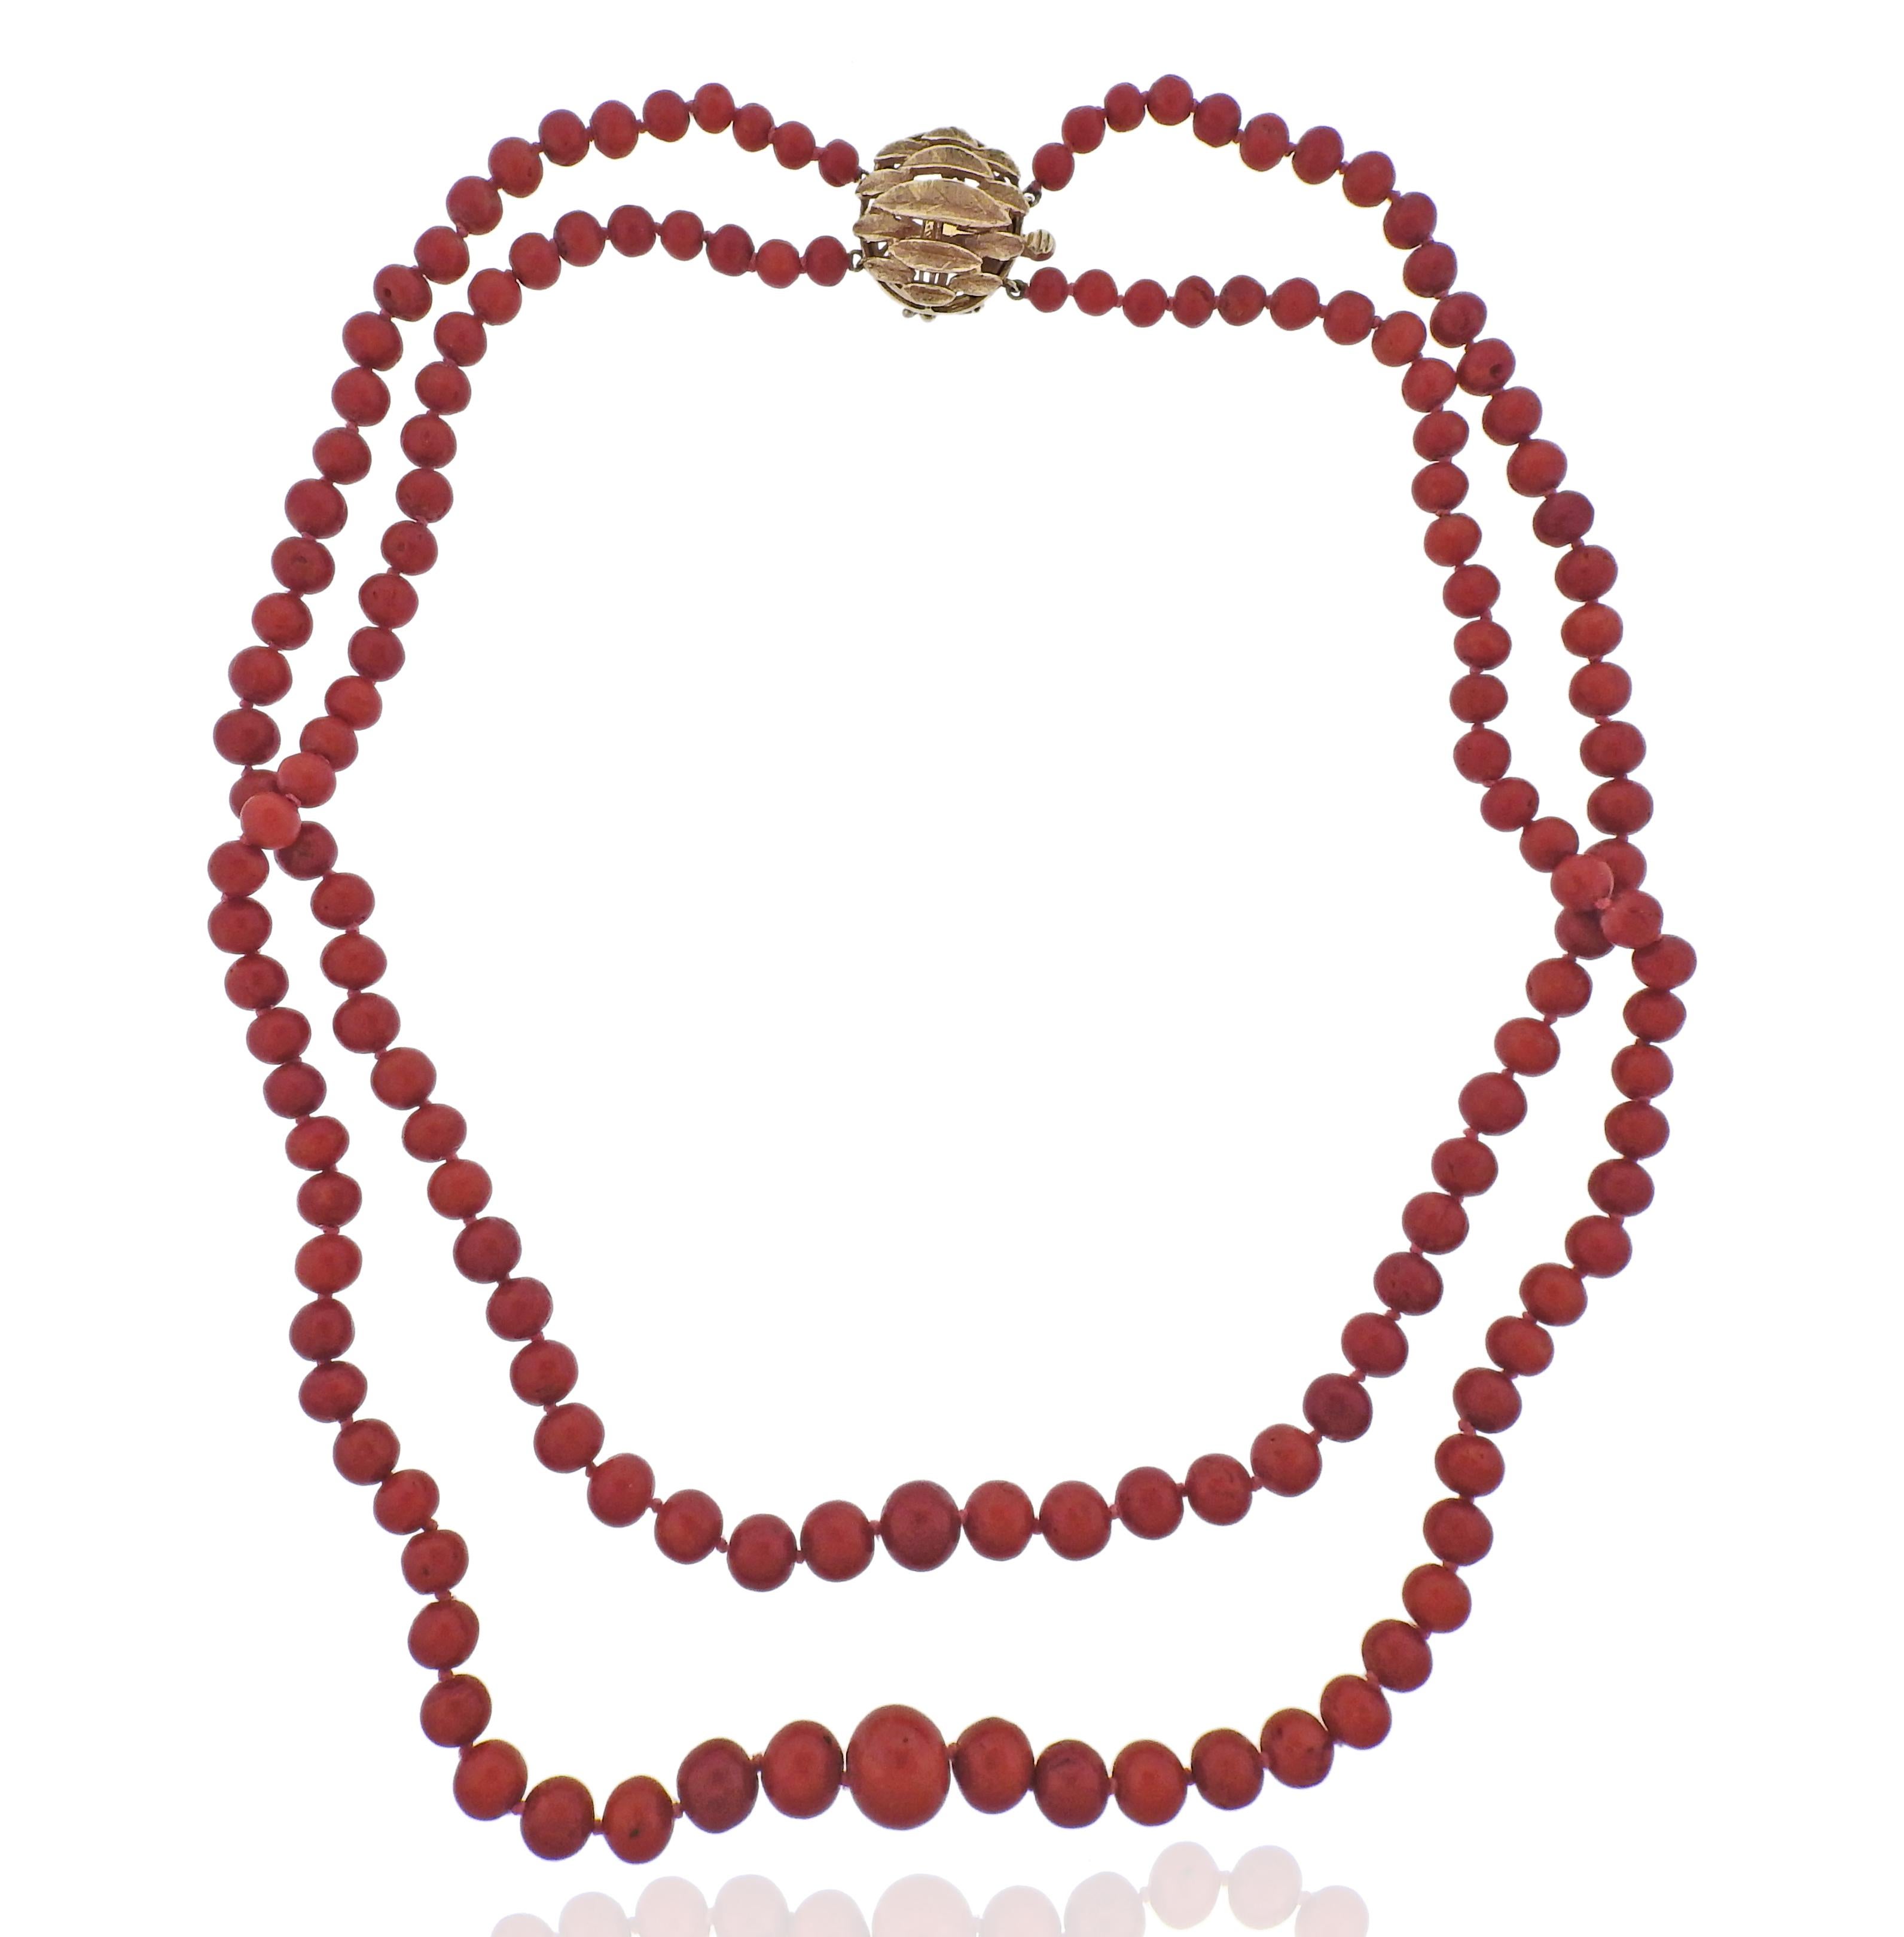 14k gold coral bead necklace, featuring stones 5mm to 12mm in size. Necklace 20